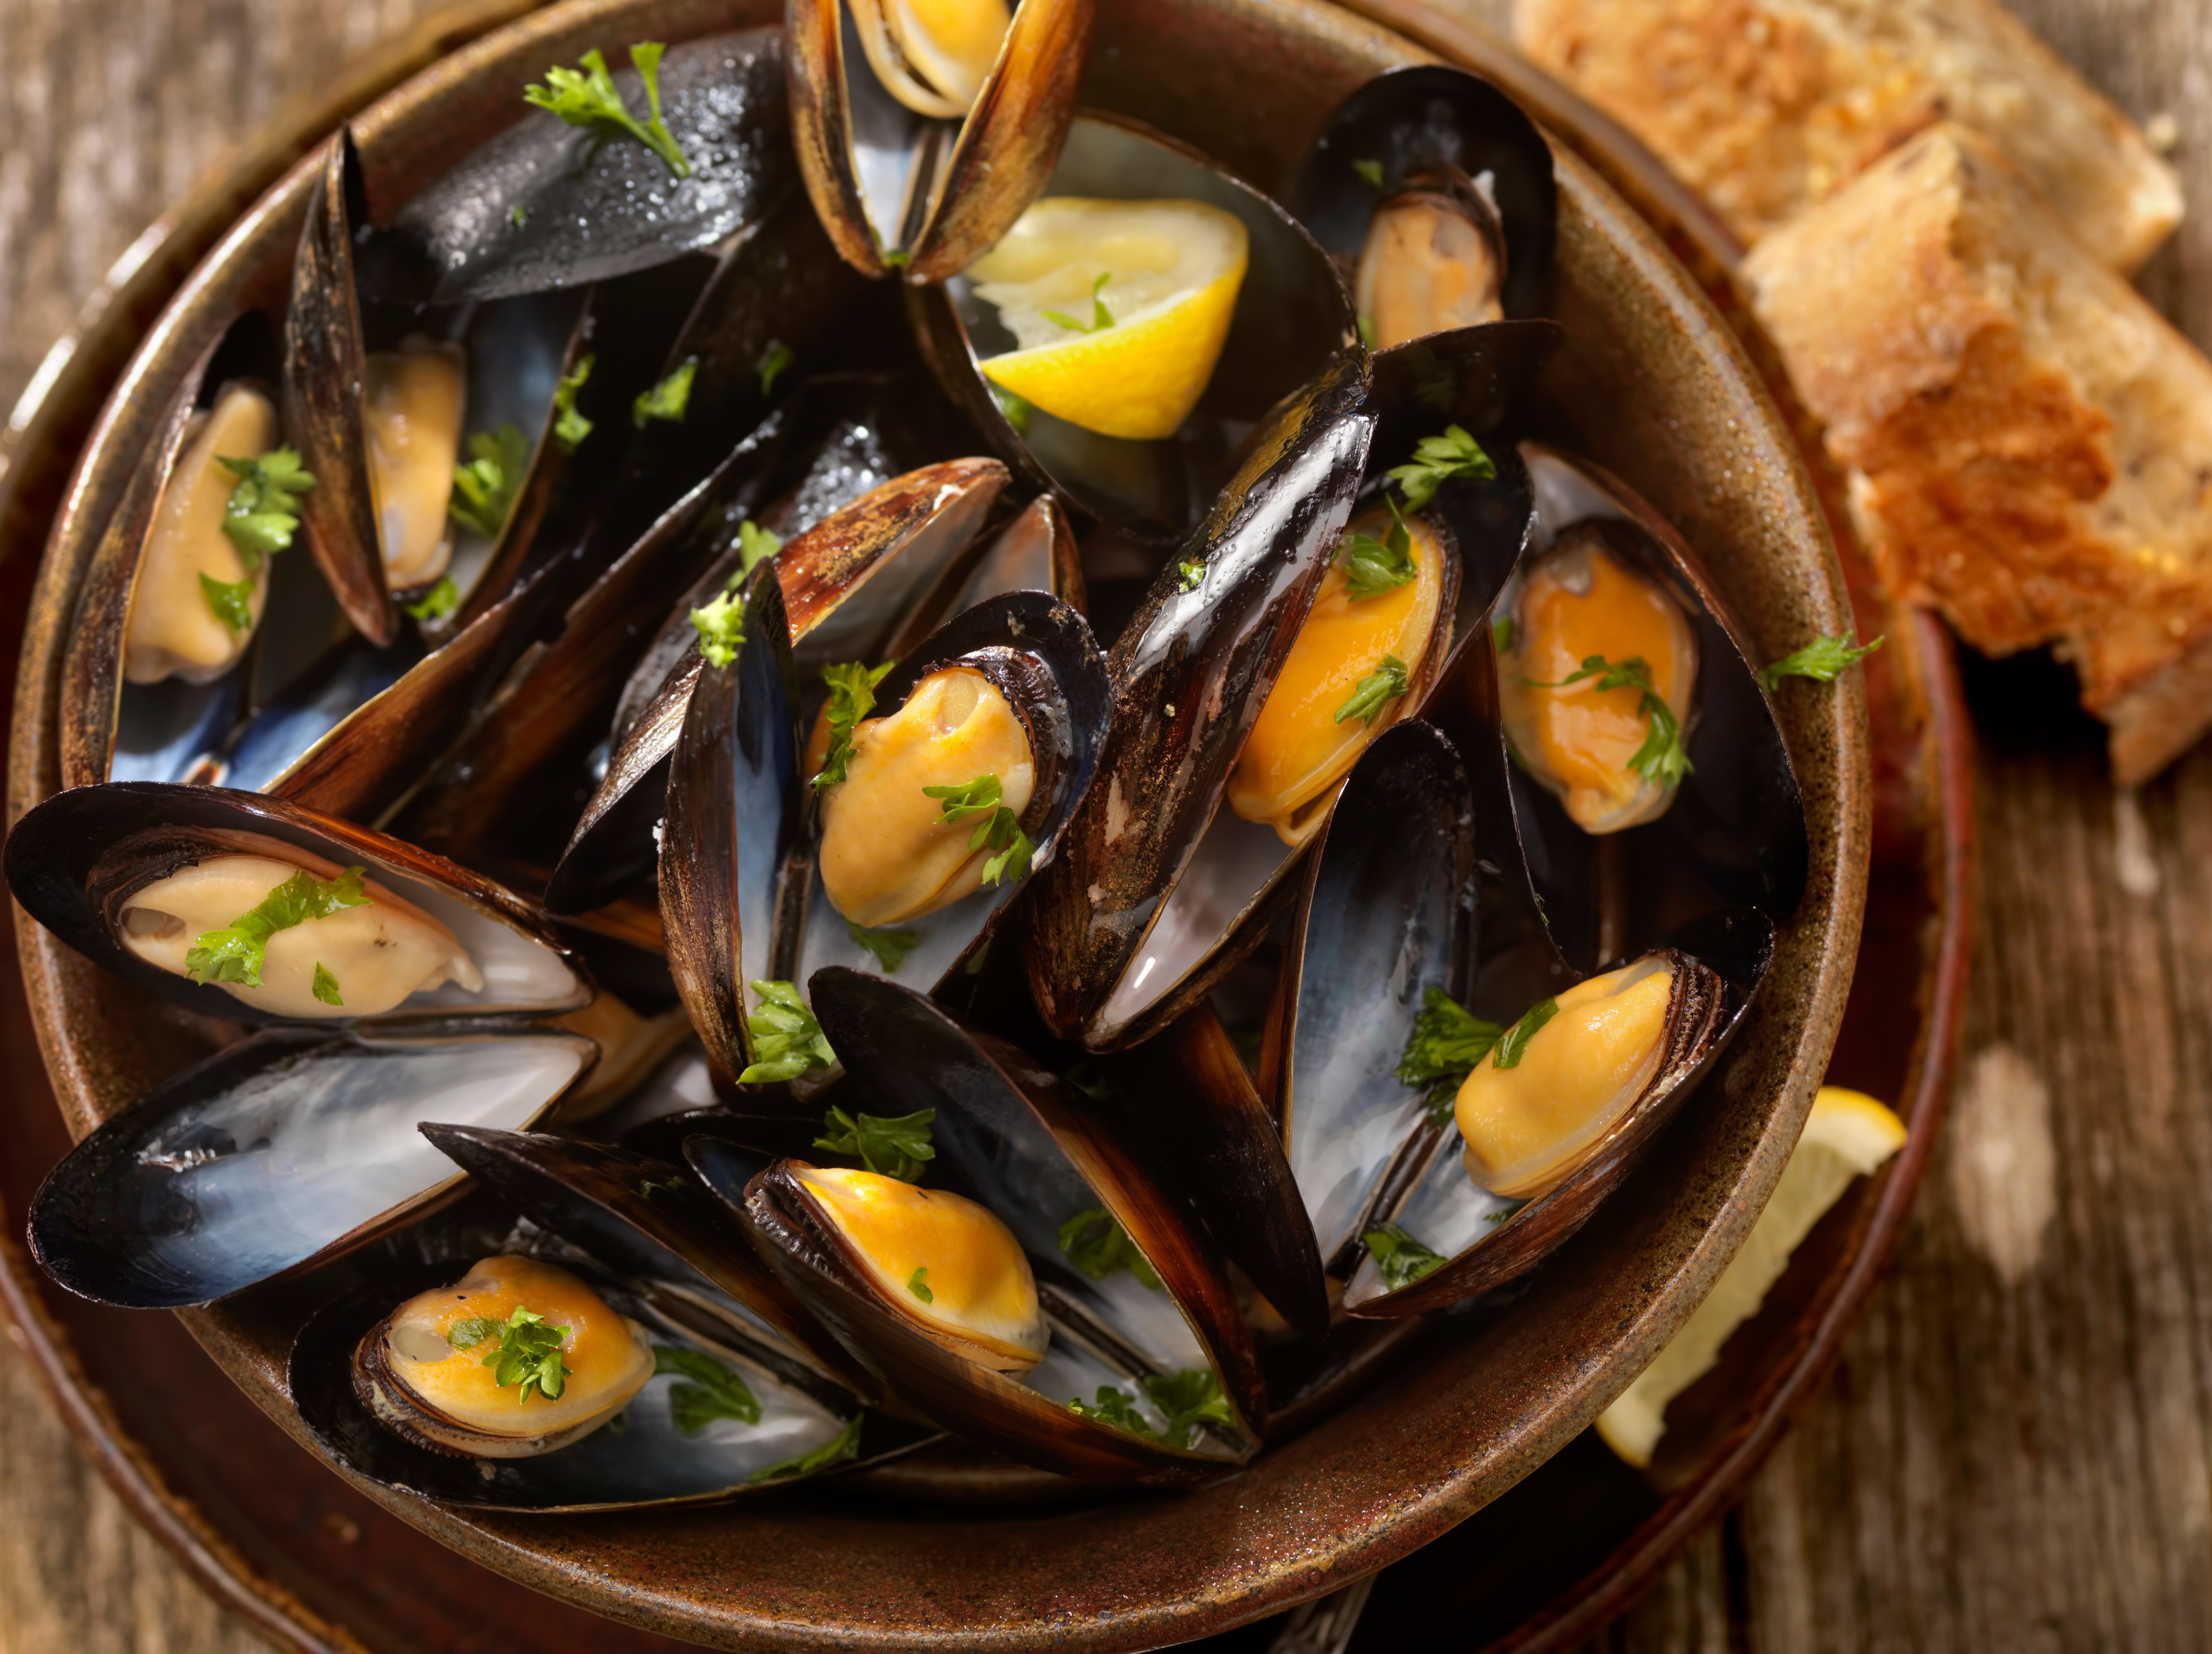 This is the simplest way to cook mussels and also the most satisfying